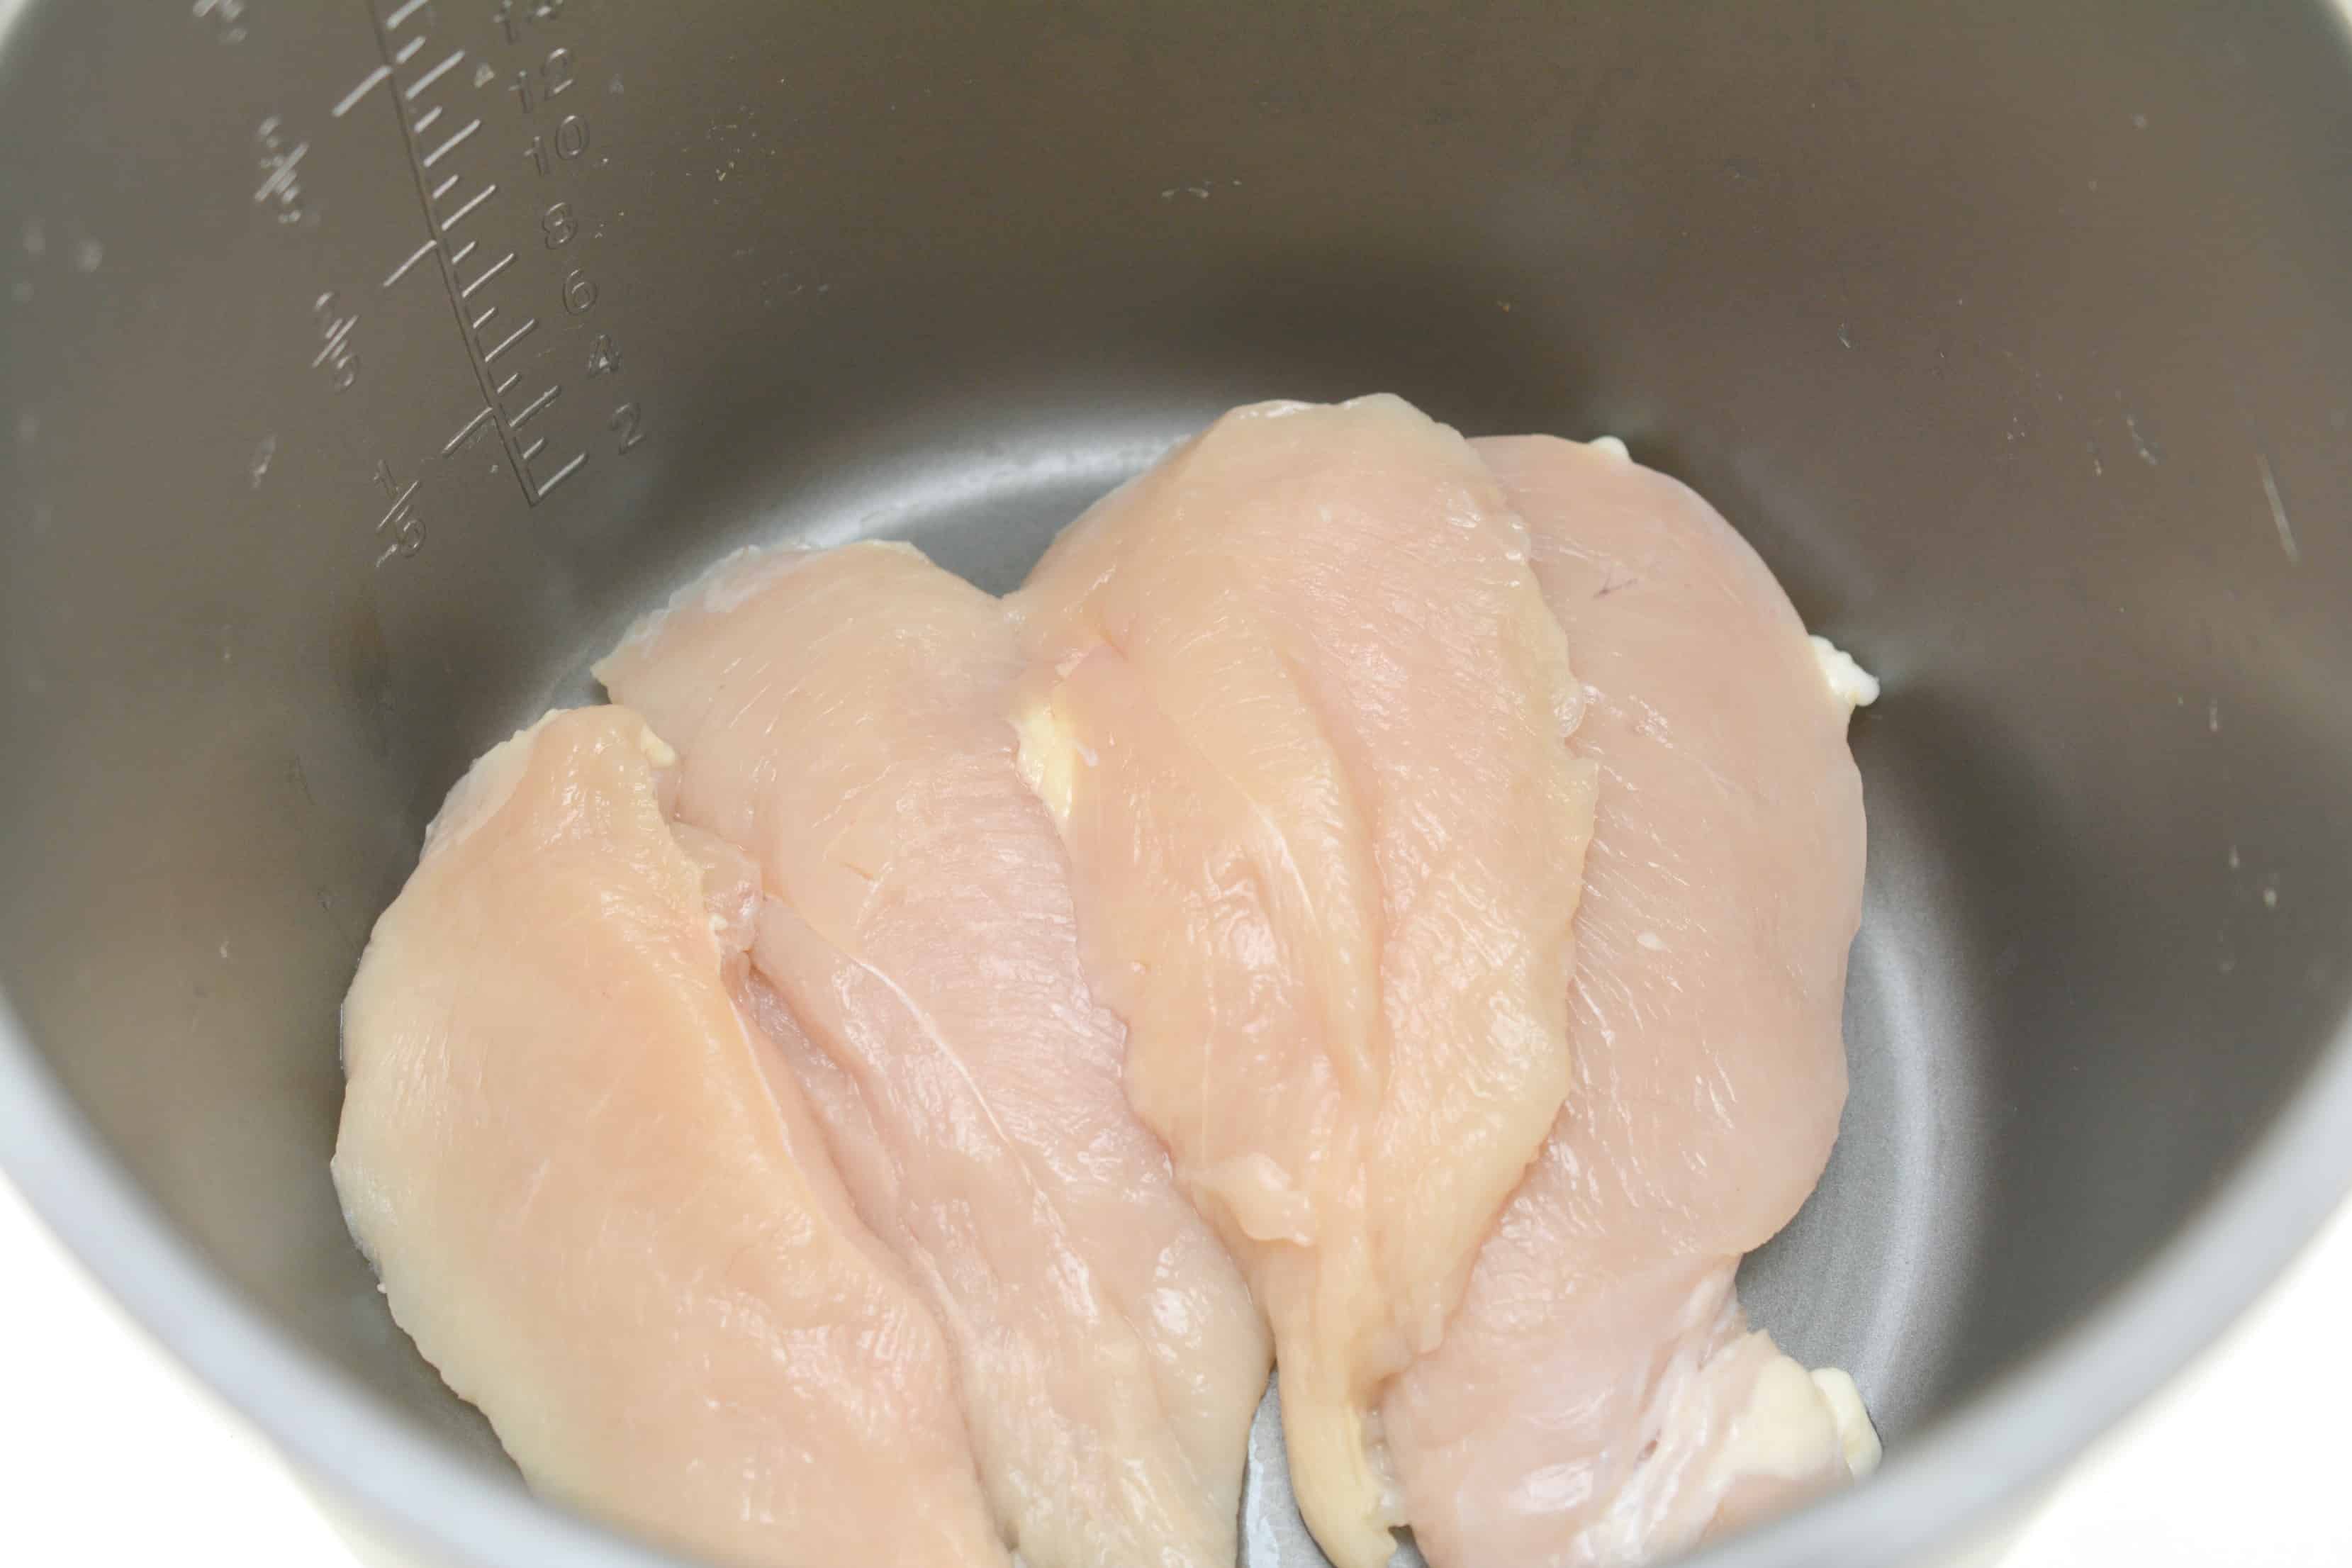 chicken in the instant pot